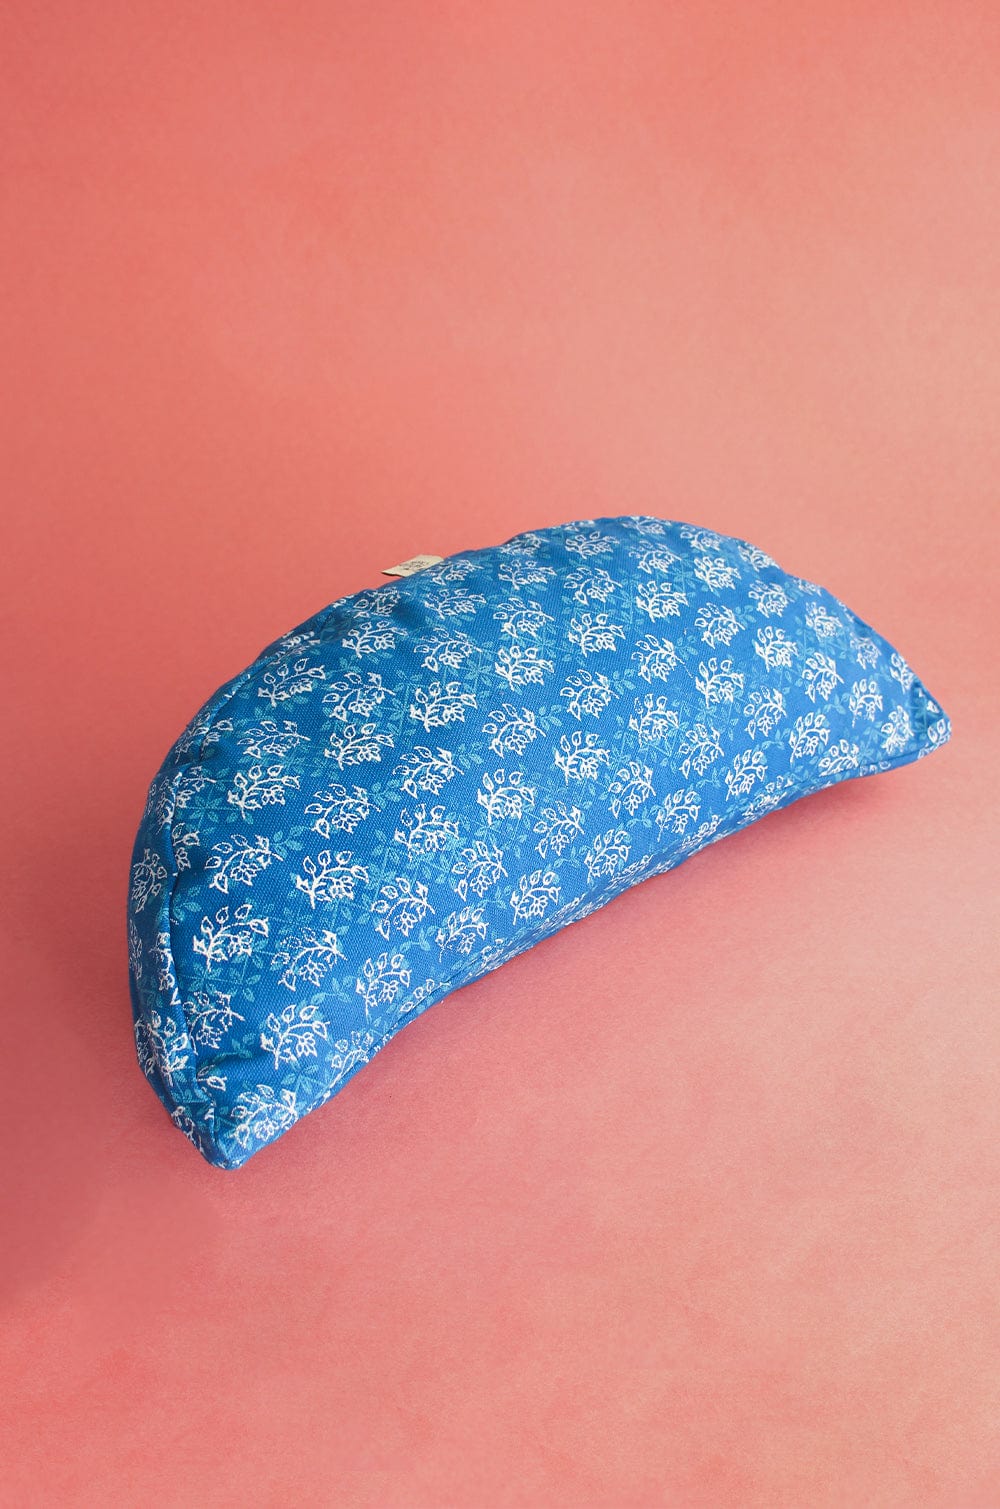 Serenity Neck Pillow With Buckwheat Filling